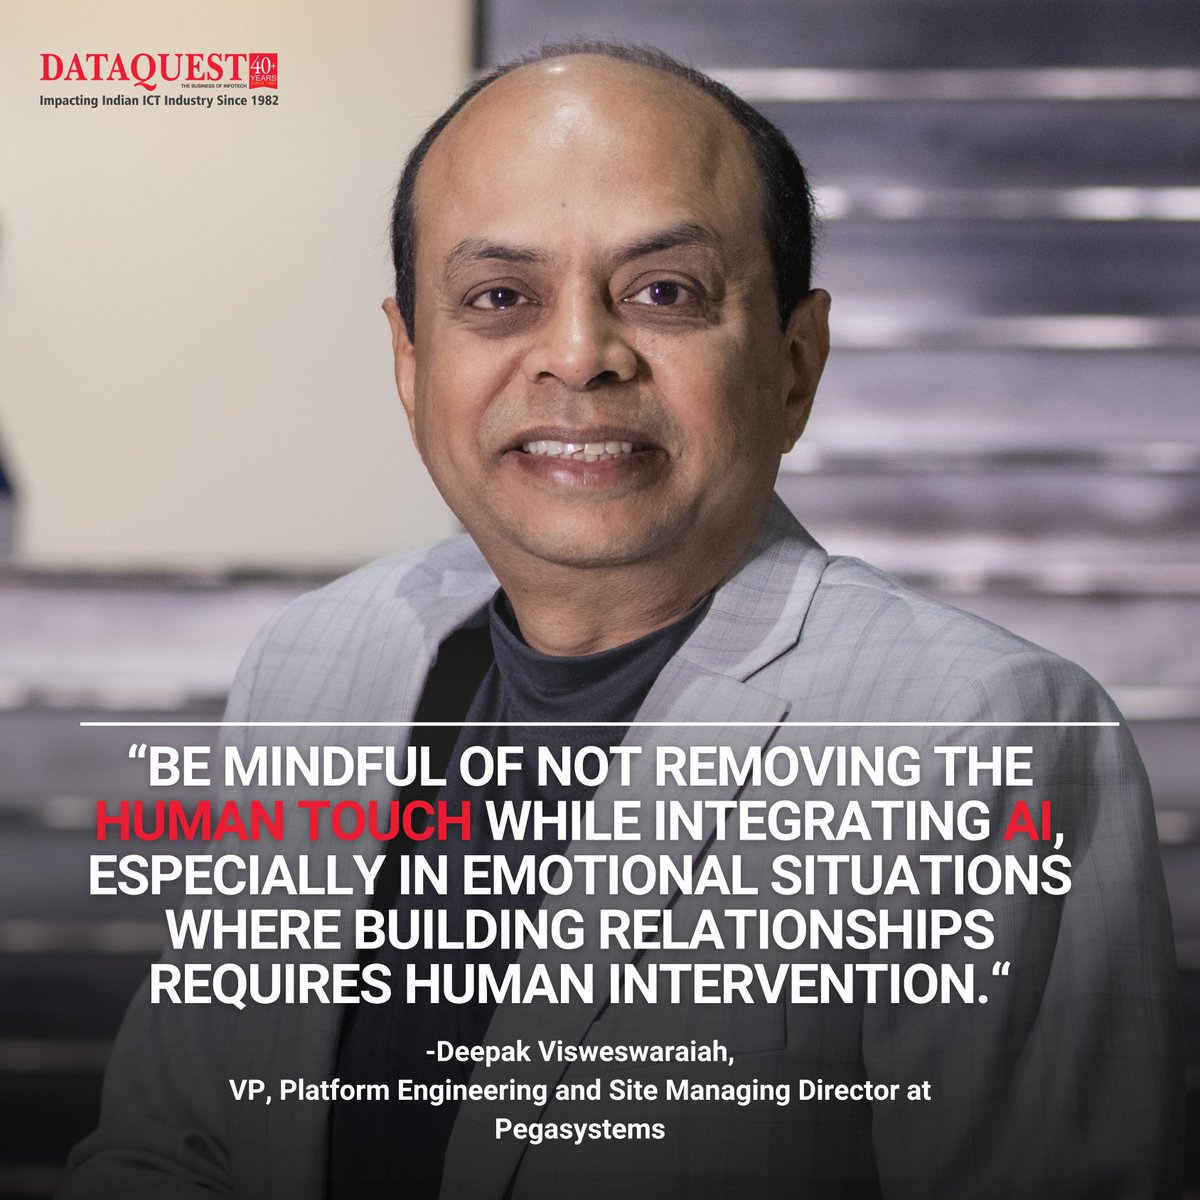 According to Deepak Visweswaraiah, VP at Pegasystems, Indian companies must be mindful of not removing the human touch when integrating AI, especially in emotional situations where building relationships requires human empathy. 

#AIIntegration #HumanTouch #EmotionalIntelligence